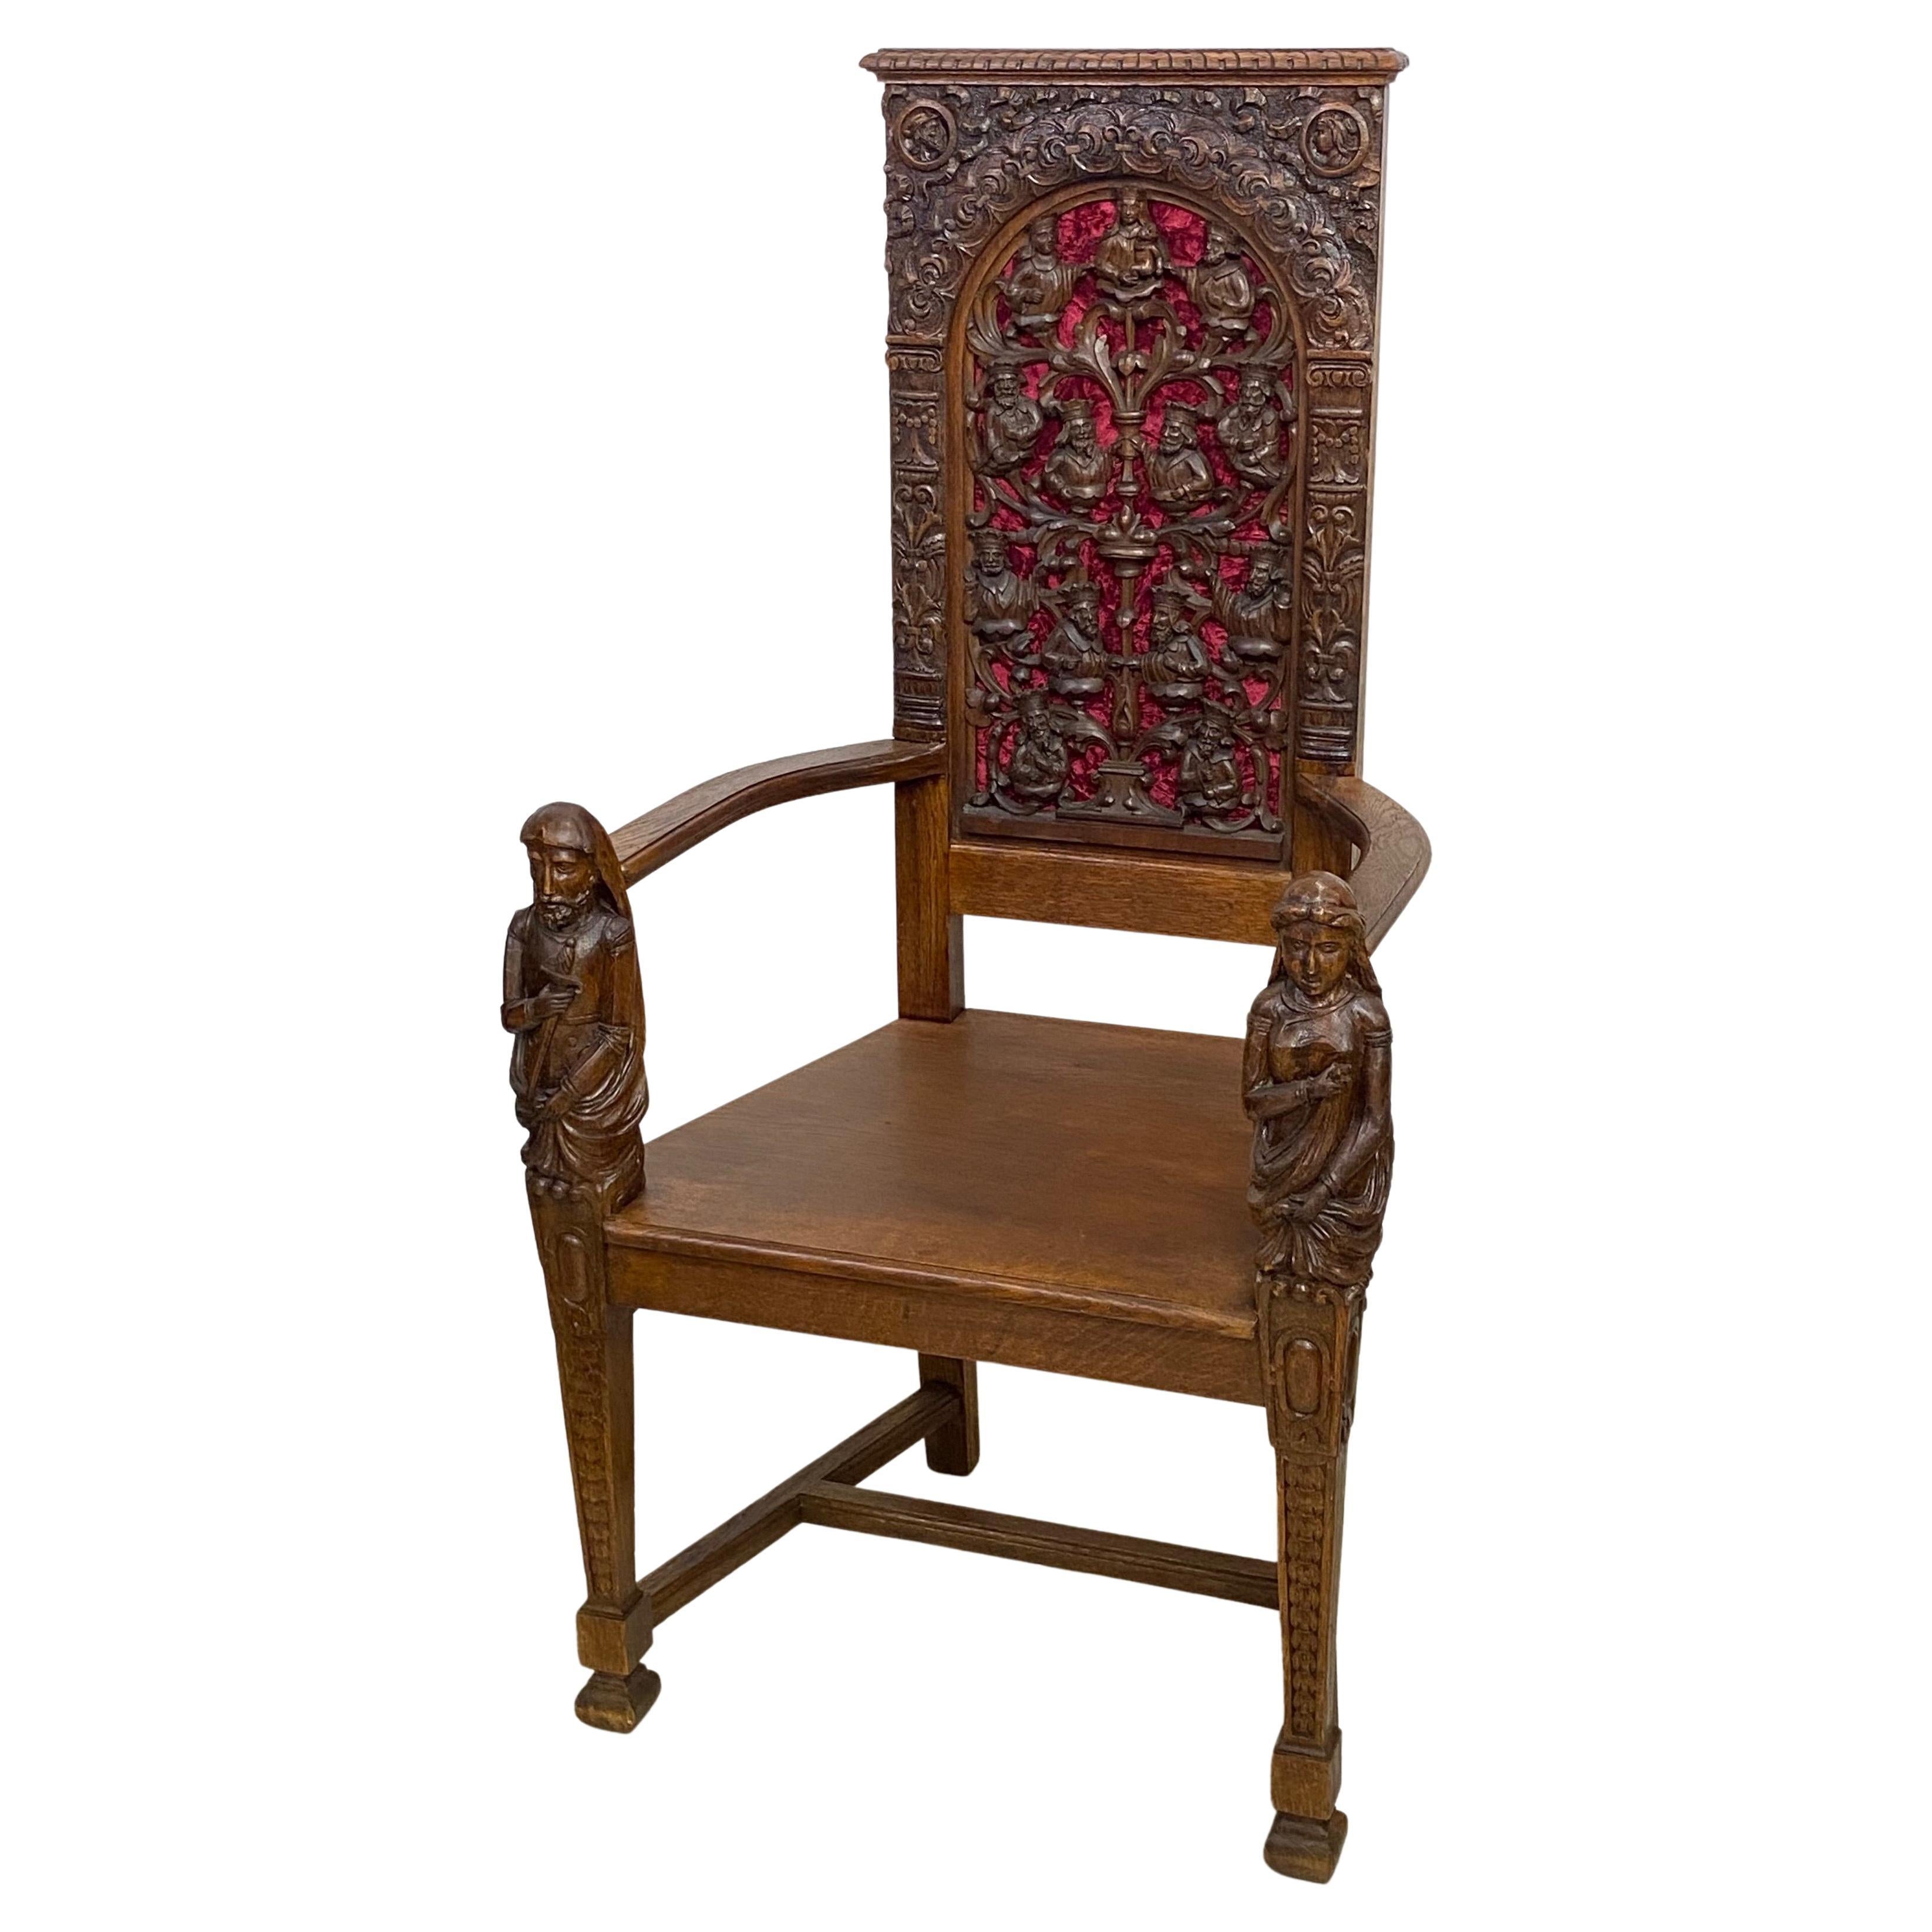 19th Century English Gothic Revival Carved Oak Armchair